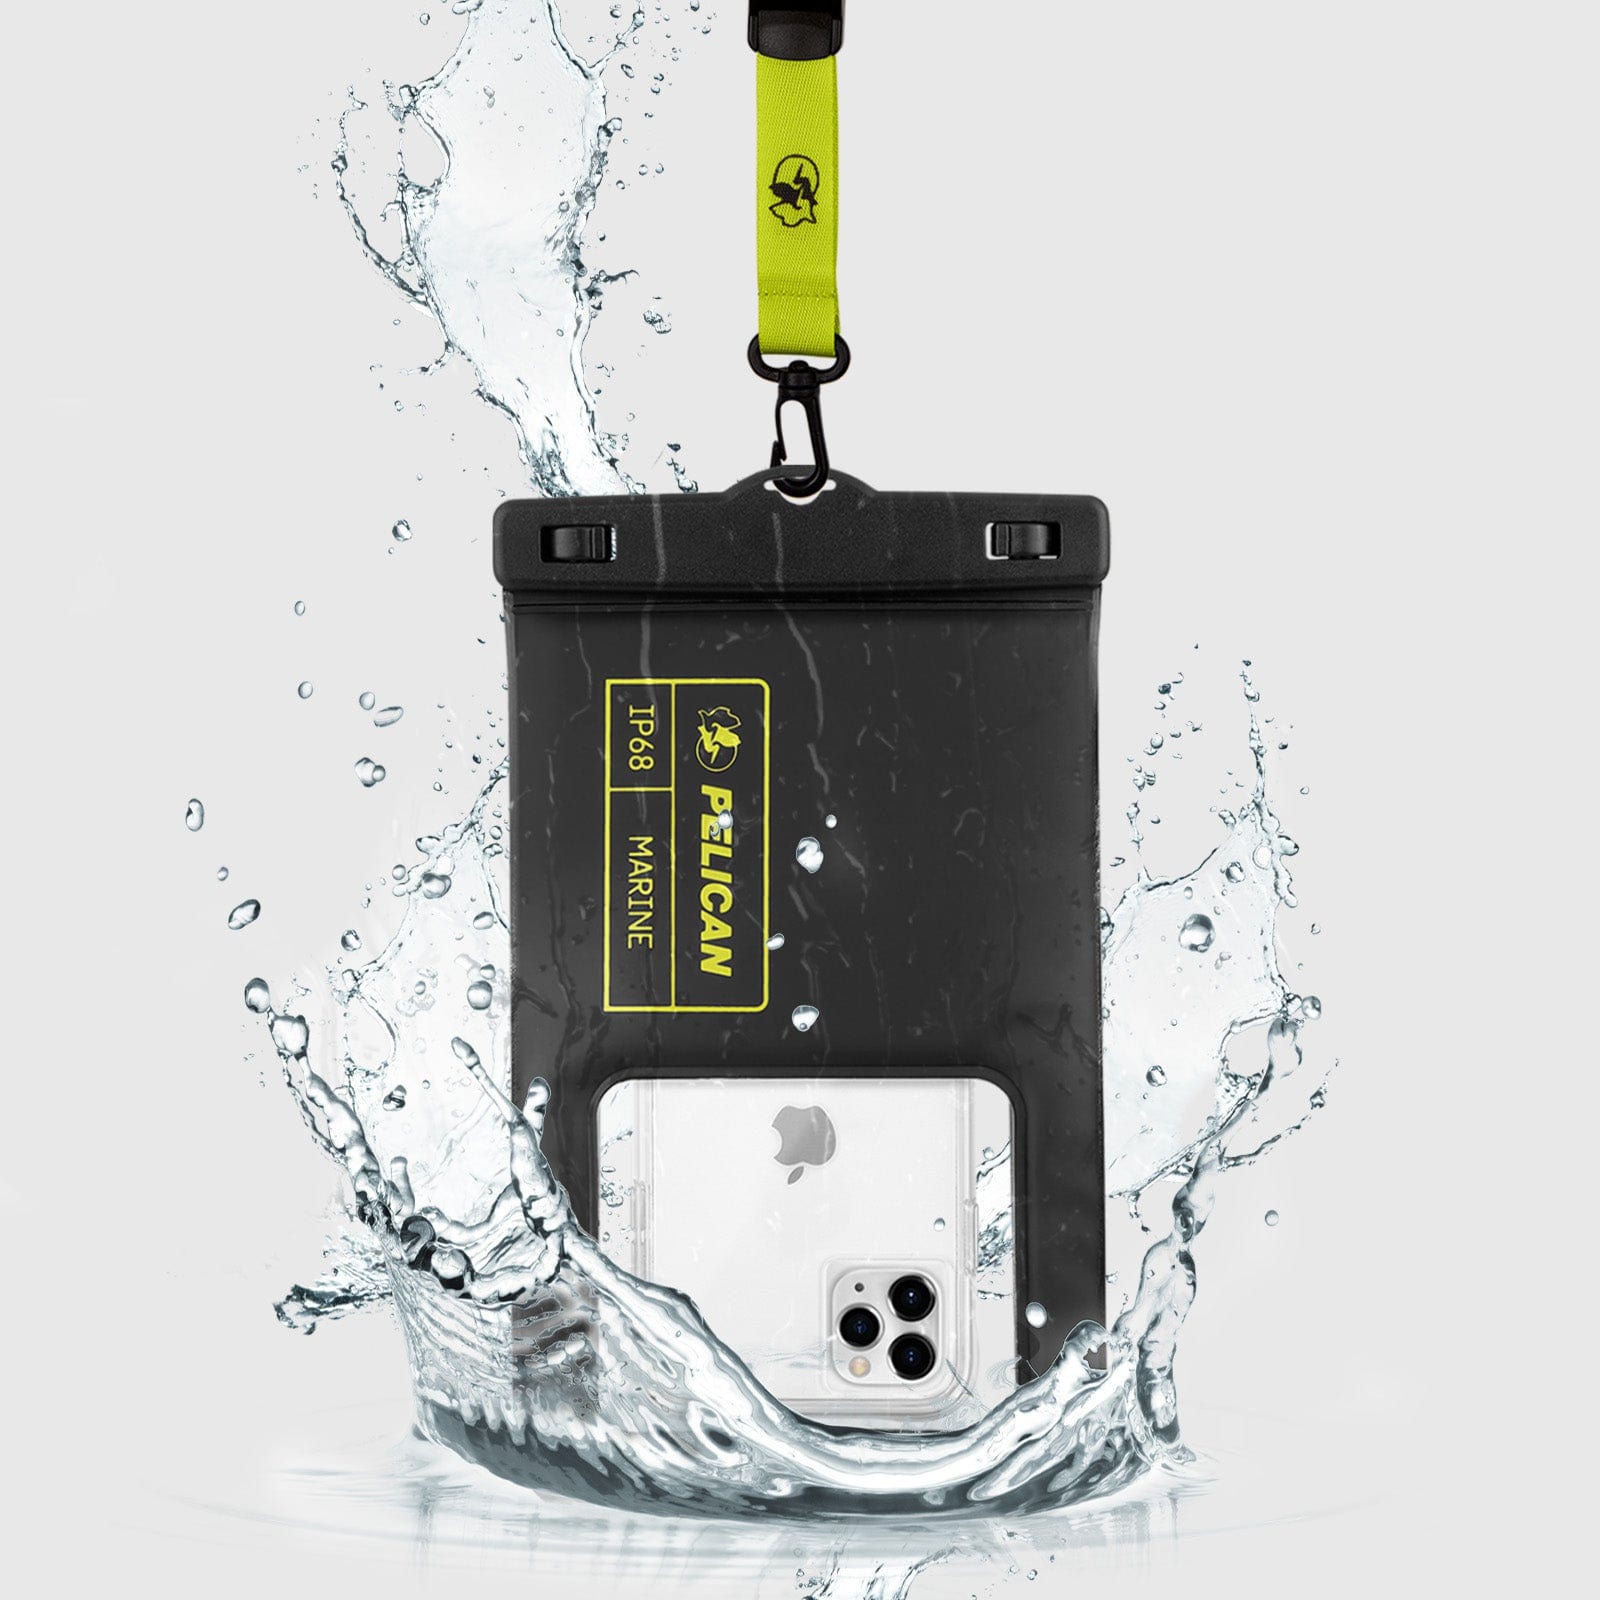 Pelican Marine Waterproof Floating Pouch XL (Black/ Hi Vis Yellow) - Phone Pouch